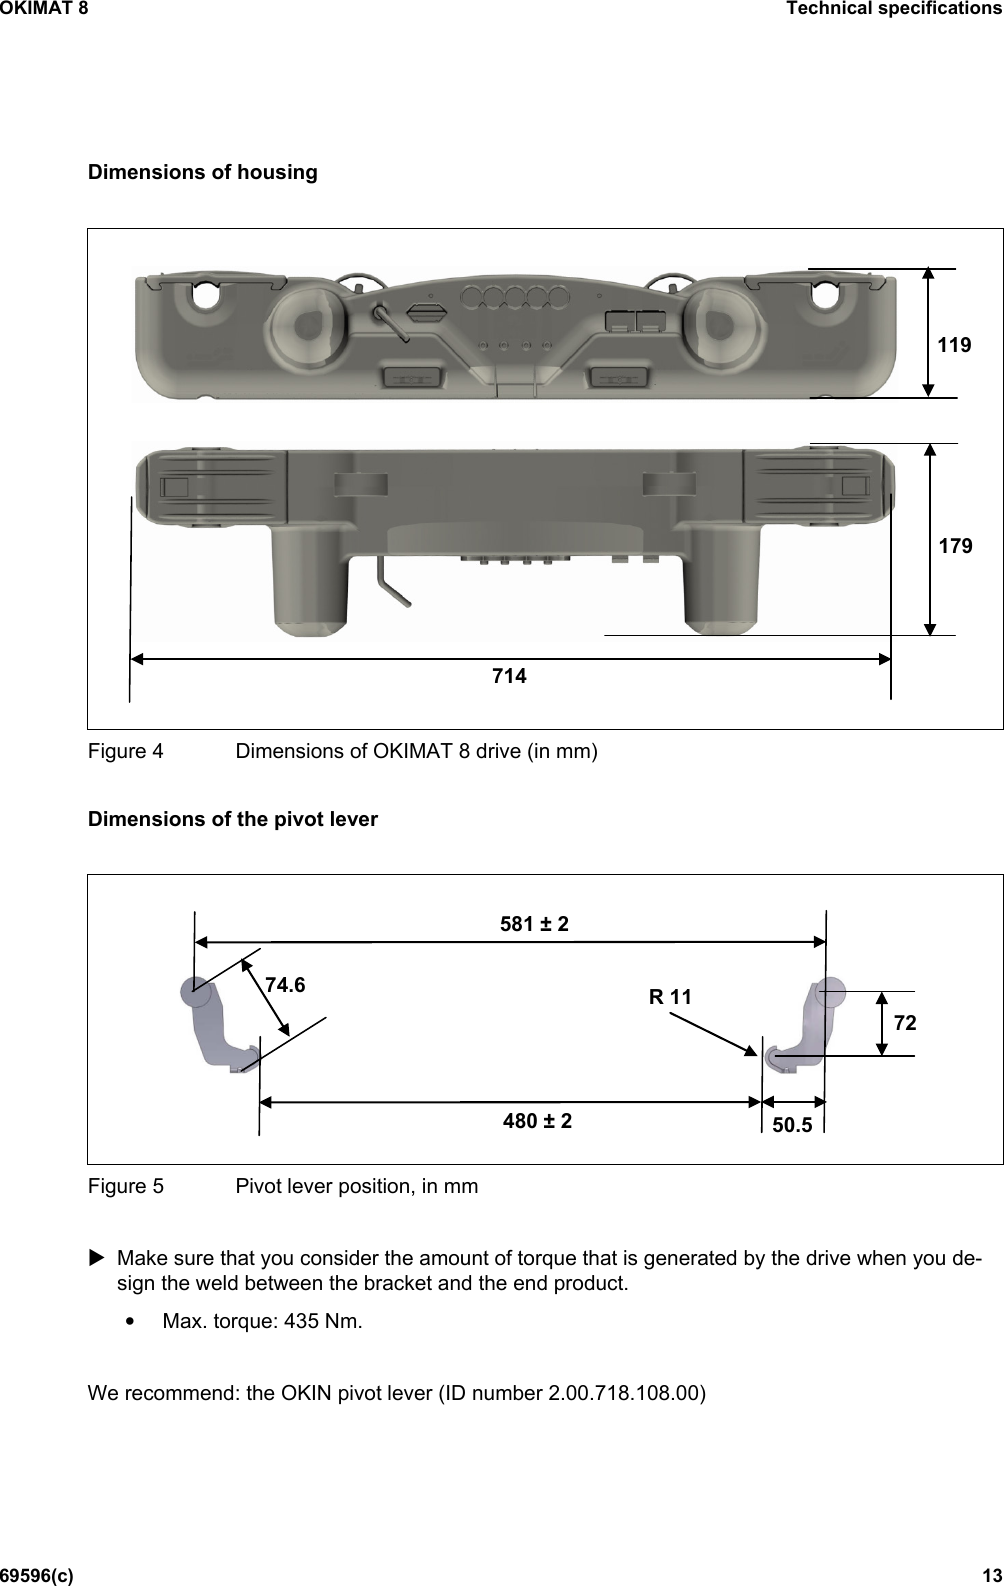 OKIMAT 8 Technical specifications 69596(c) 13 Dimensions of housing     Figure 4  Dimensions of OKIMAT 8 drive (in mm)  Dimensions of the pivot lever     Figure 5  Pivot lever position, in mm   Make sure that you consider the amount of torque that is generated by the drive when you de-sign the weld between the bracket and the end product. • Max. torque: 435 Nm.  We recommend: the OKIN pivot lever (ID number 2.00.718.108.00)  714 179 119 480 ± 2 581 ± 2 74.6 50.5 72 R 11 